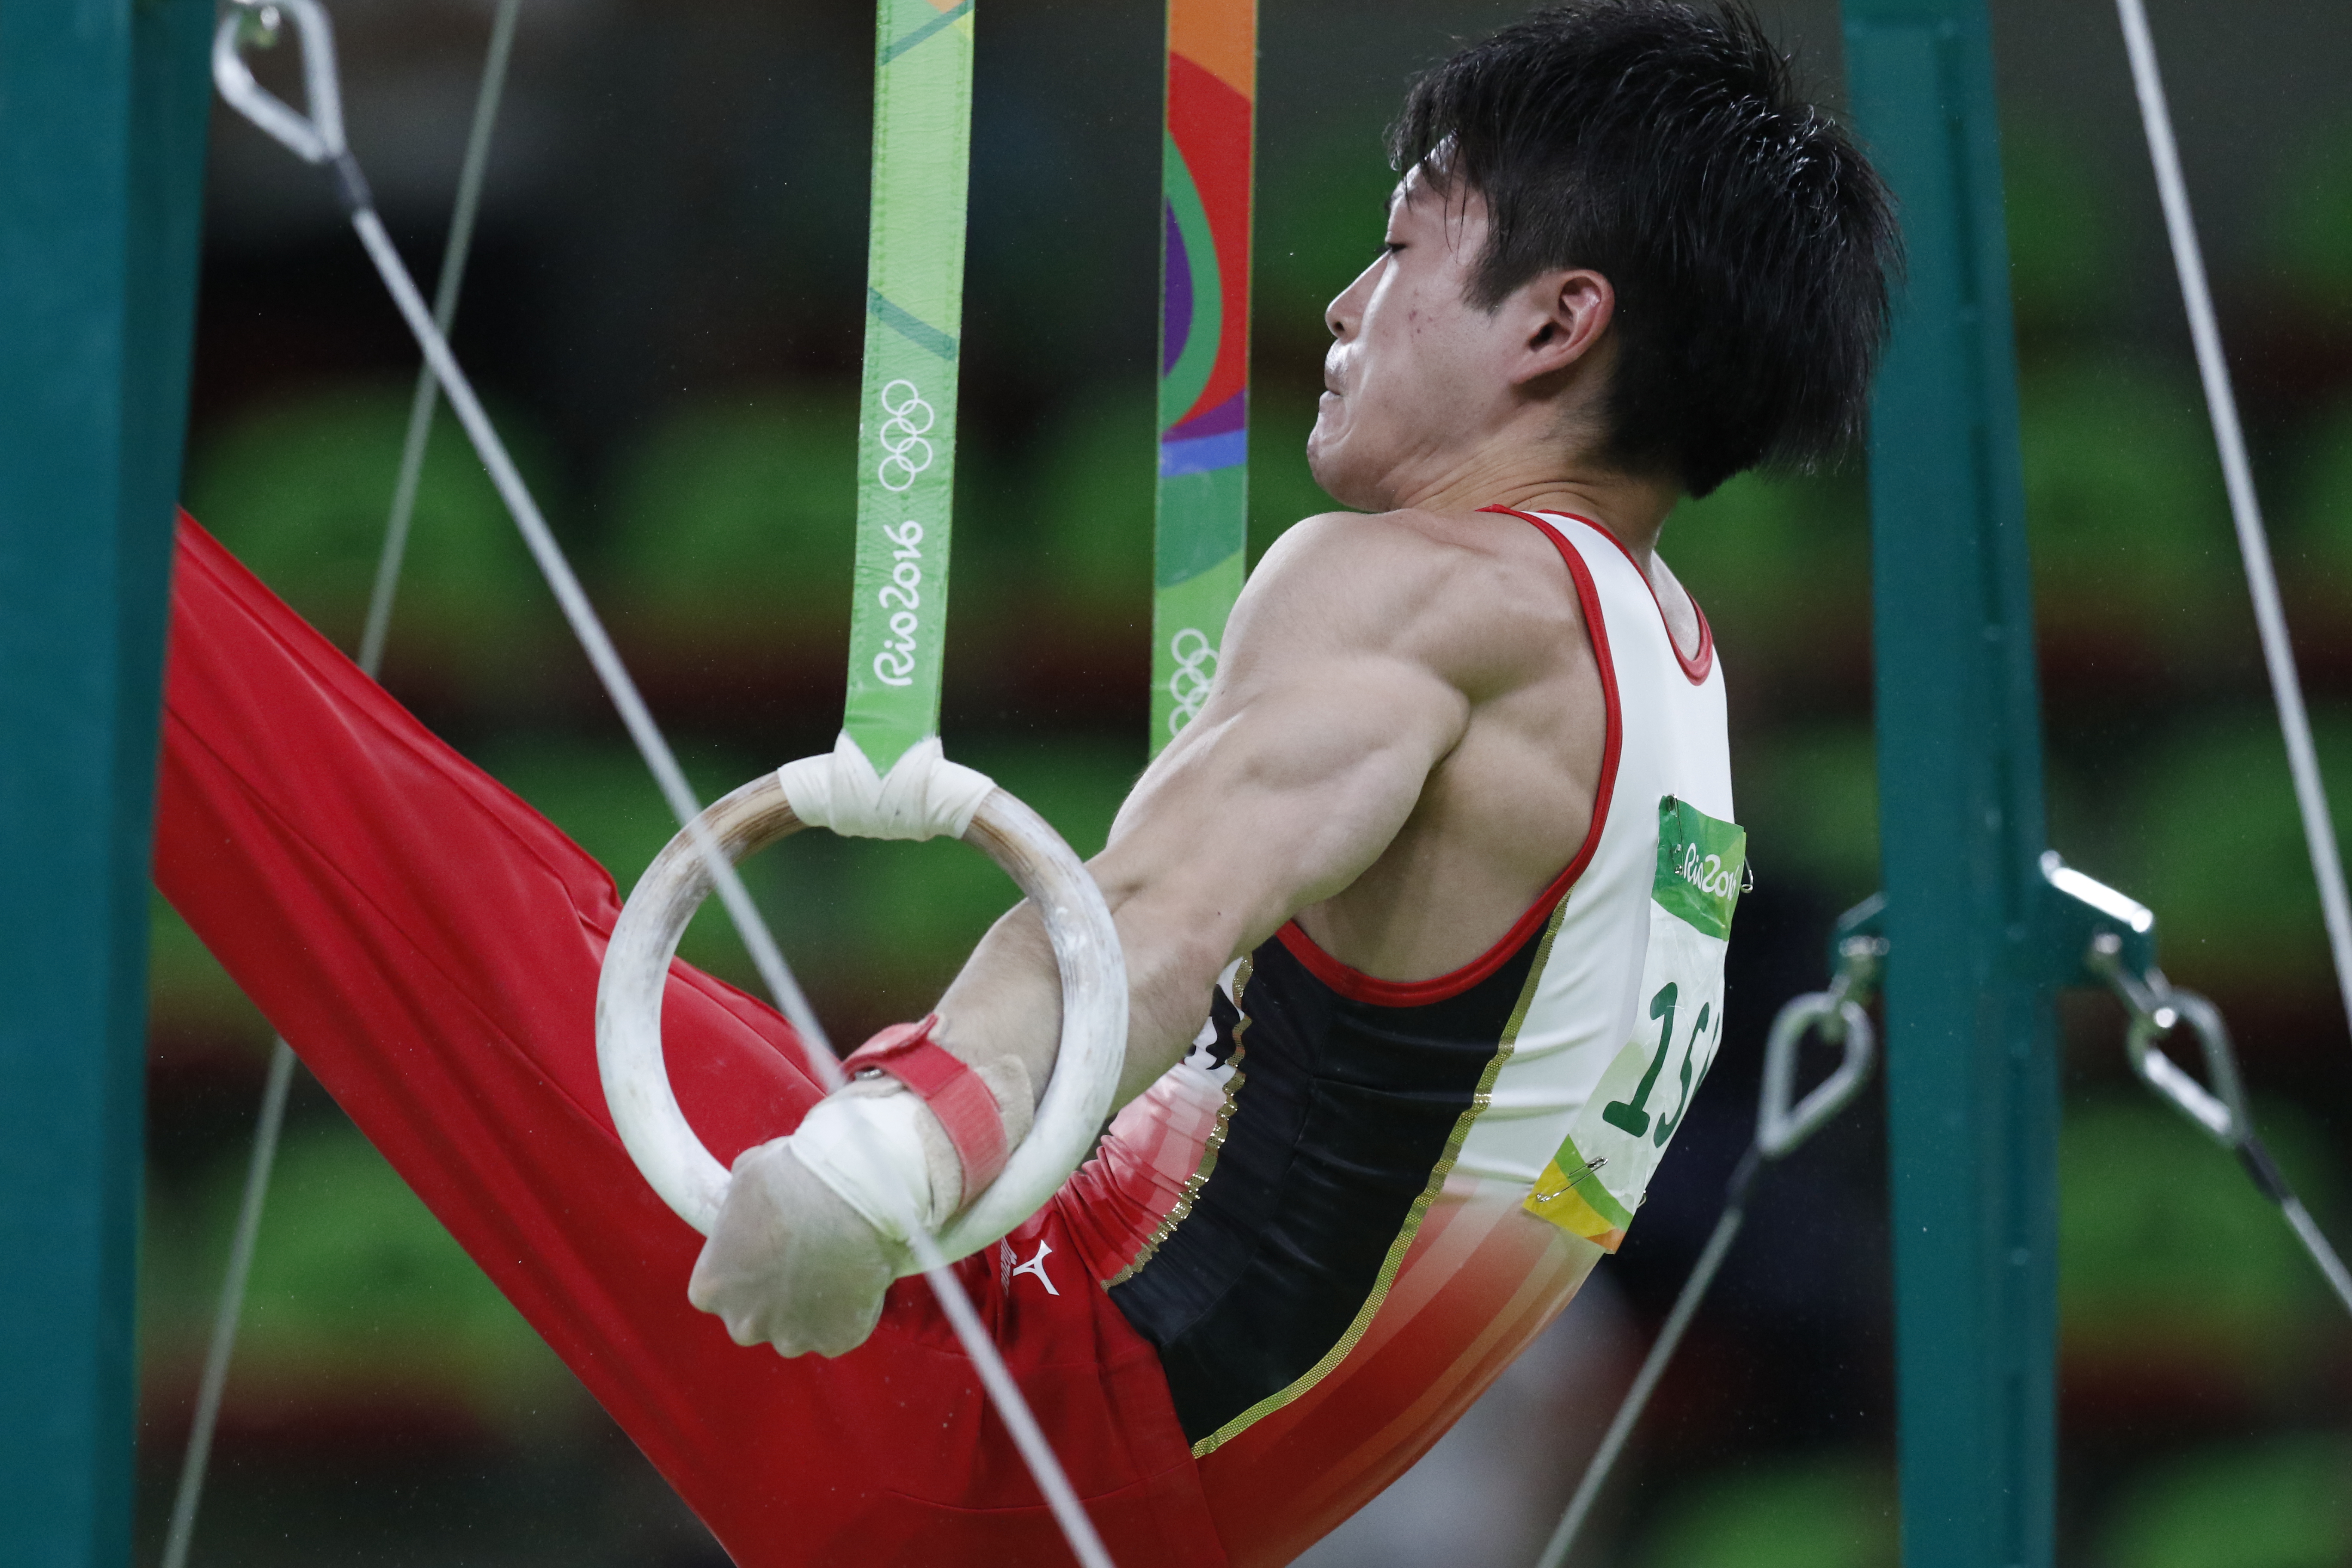 What if you could live off Victory? |Kōhei Uchimura of Japan, by Agência Brasil Fotografias.